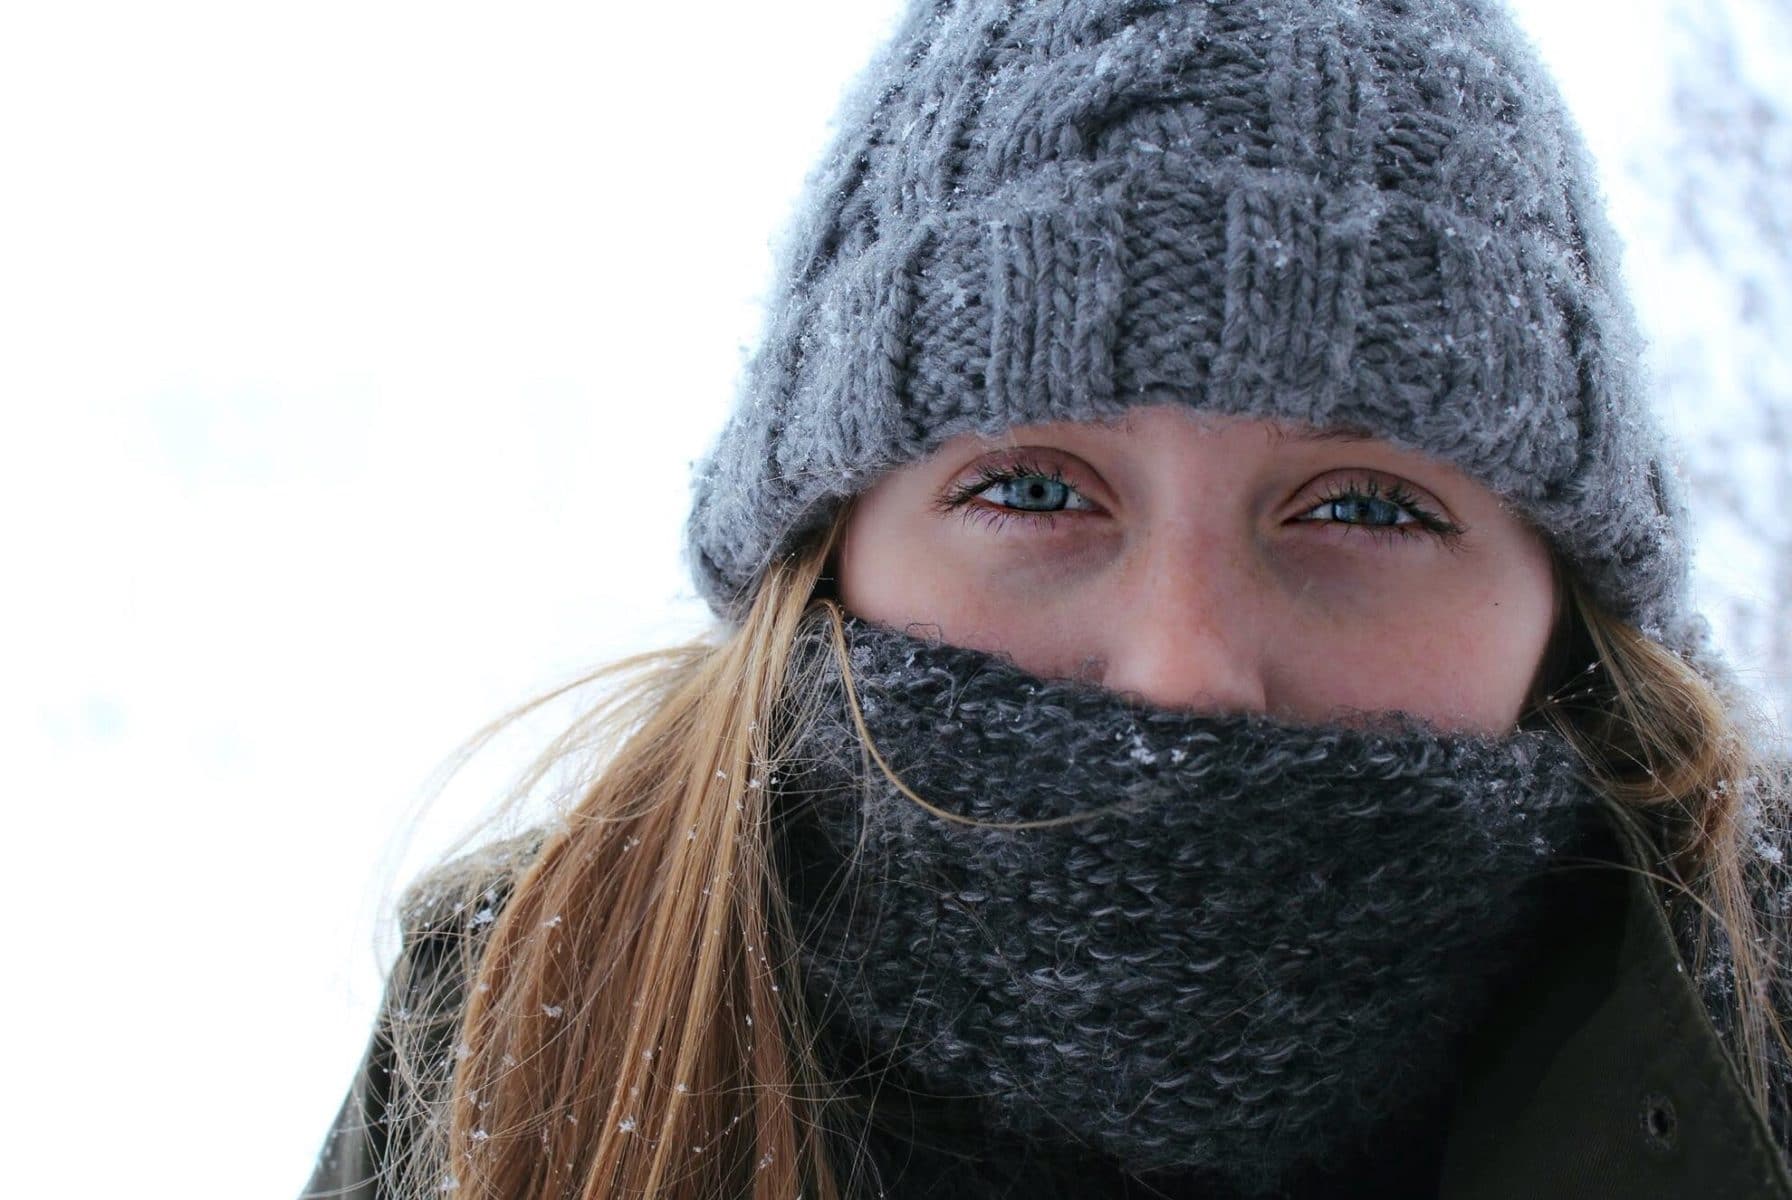 Wintry weather affects your eyes negatively if you don't protect your eyes.